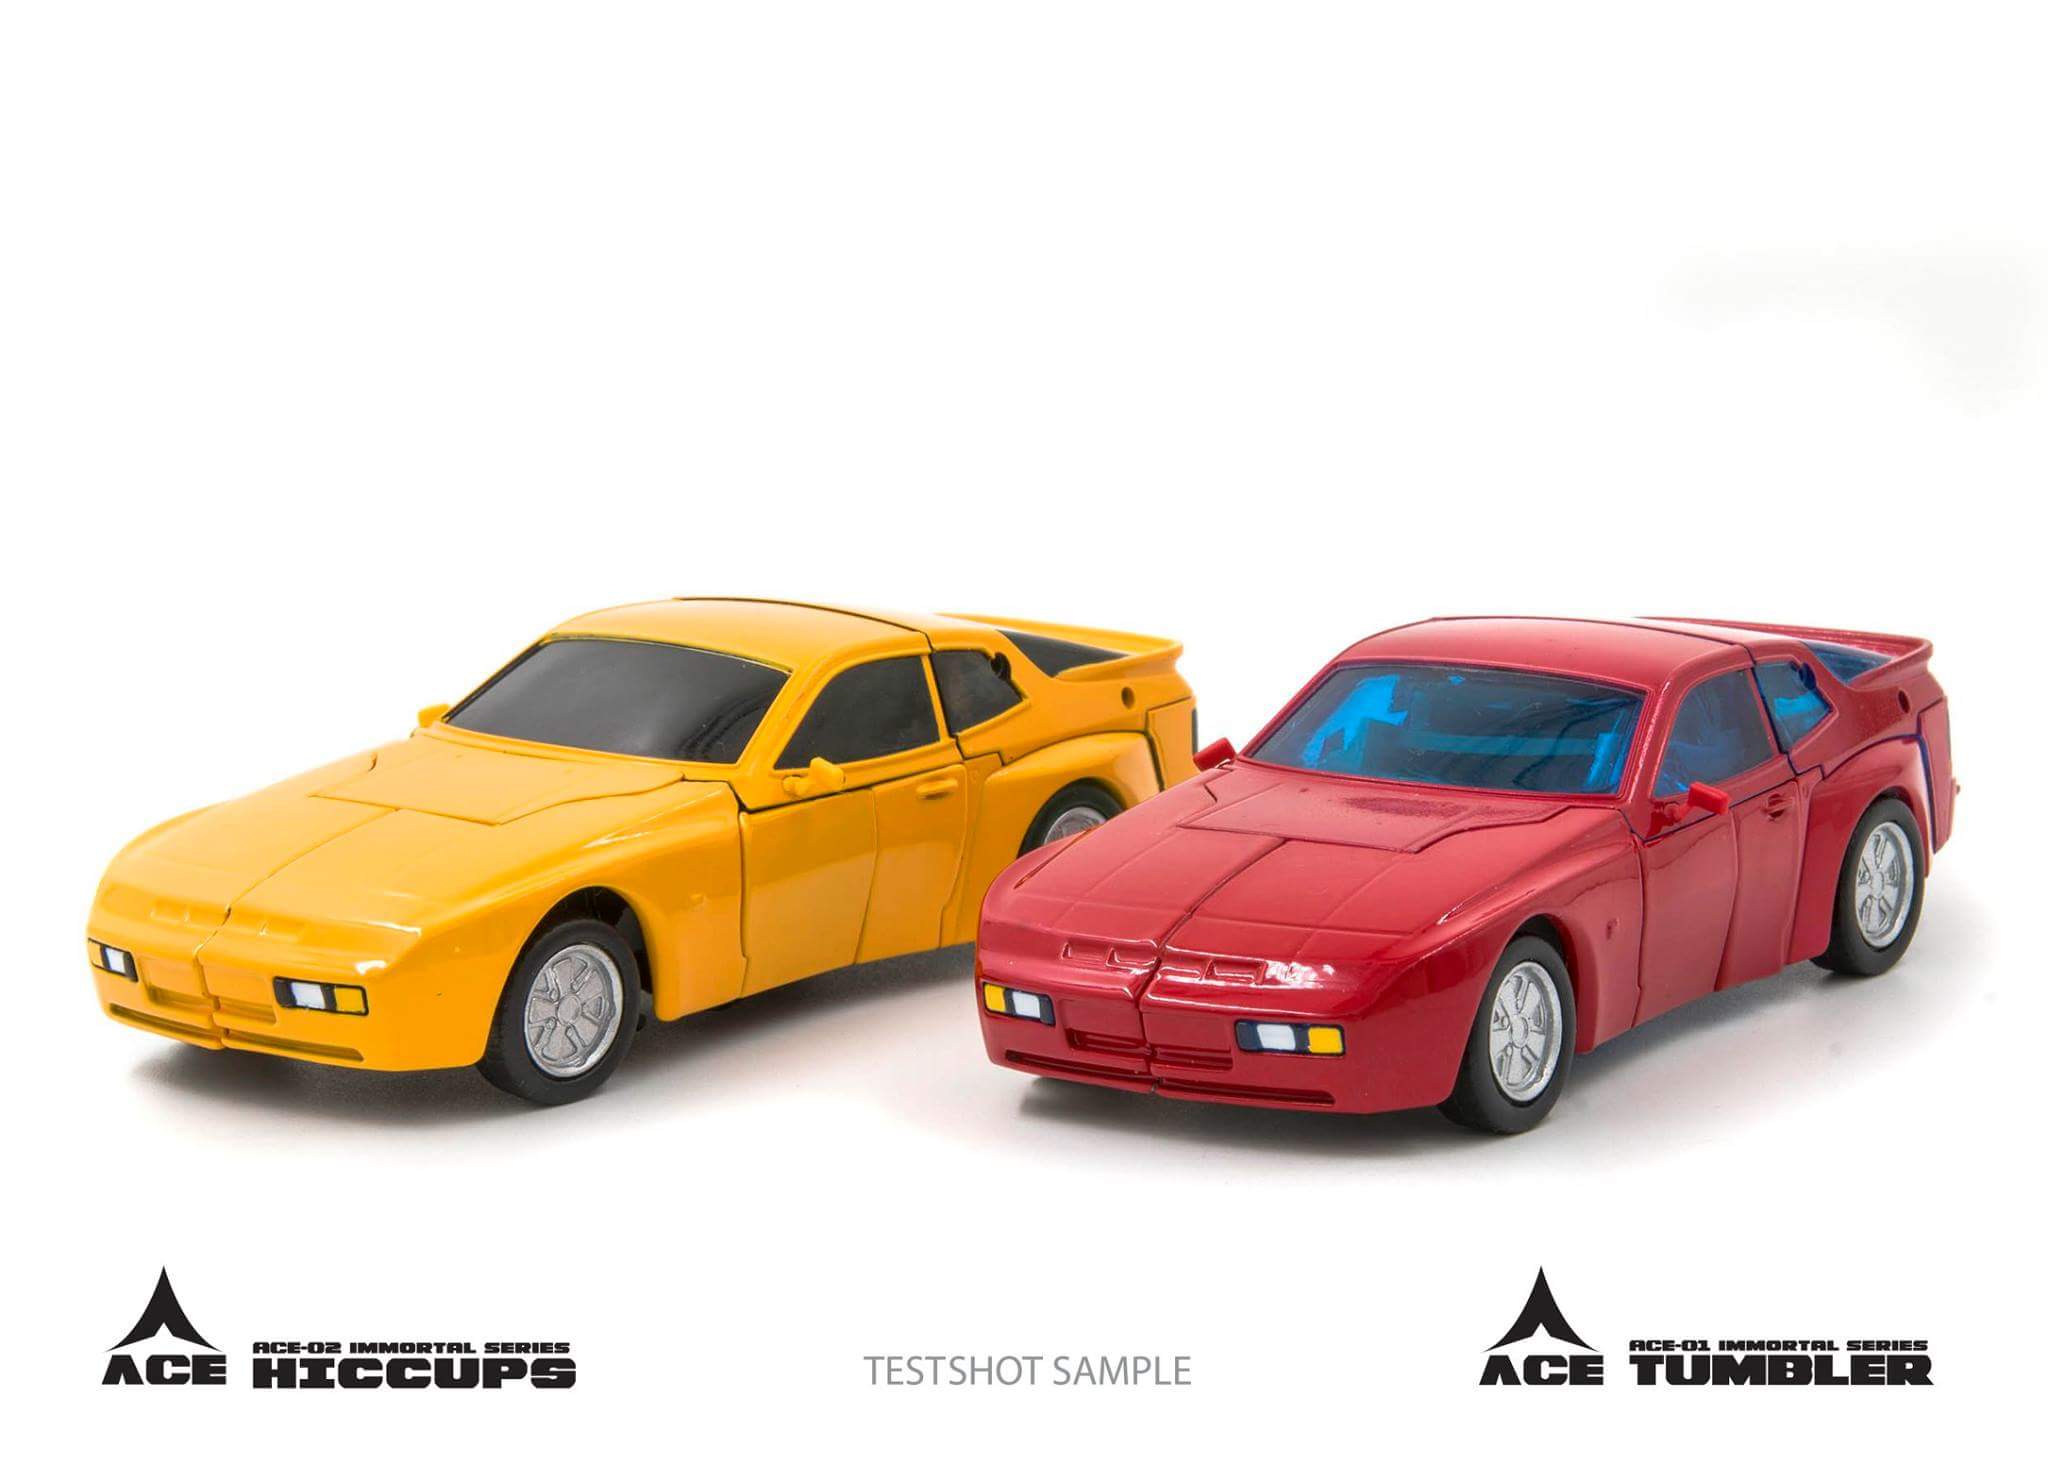 [ACE Collectables] Produit Tiers - Minibots MP - ACE-01 Tumbler (aka Cliffjumper/Matamore), ACE-02 Hiccups (aka Hubcap/Virevolto), ACE-03 Trident (aka Seaspray/Embruns) VY1tsm5o